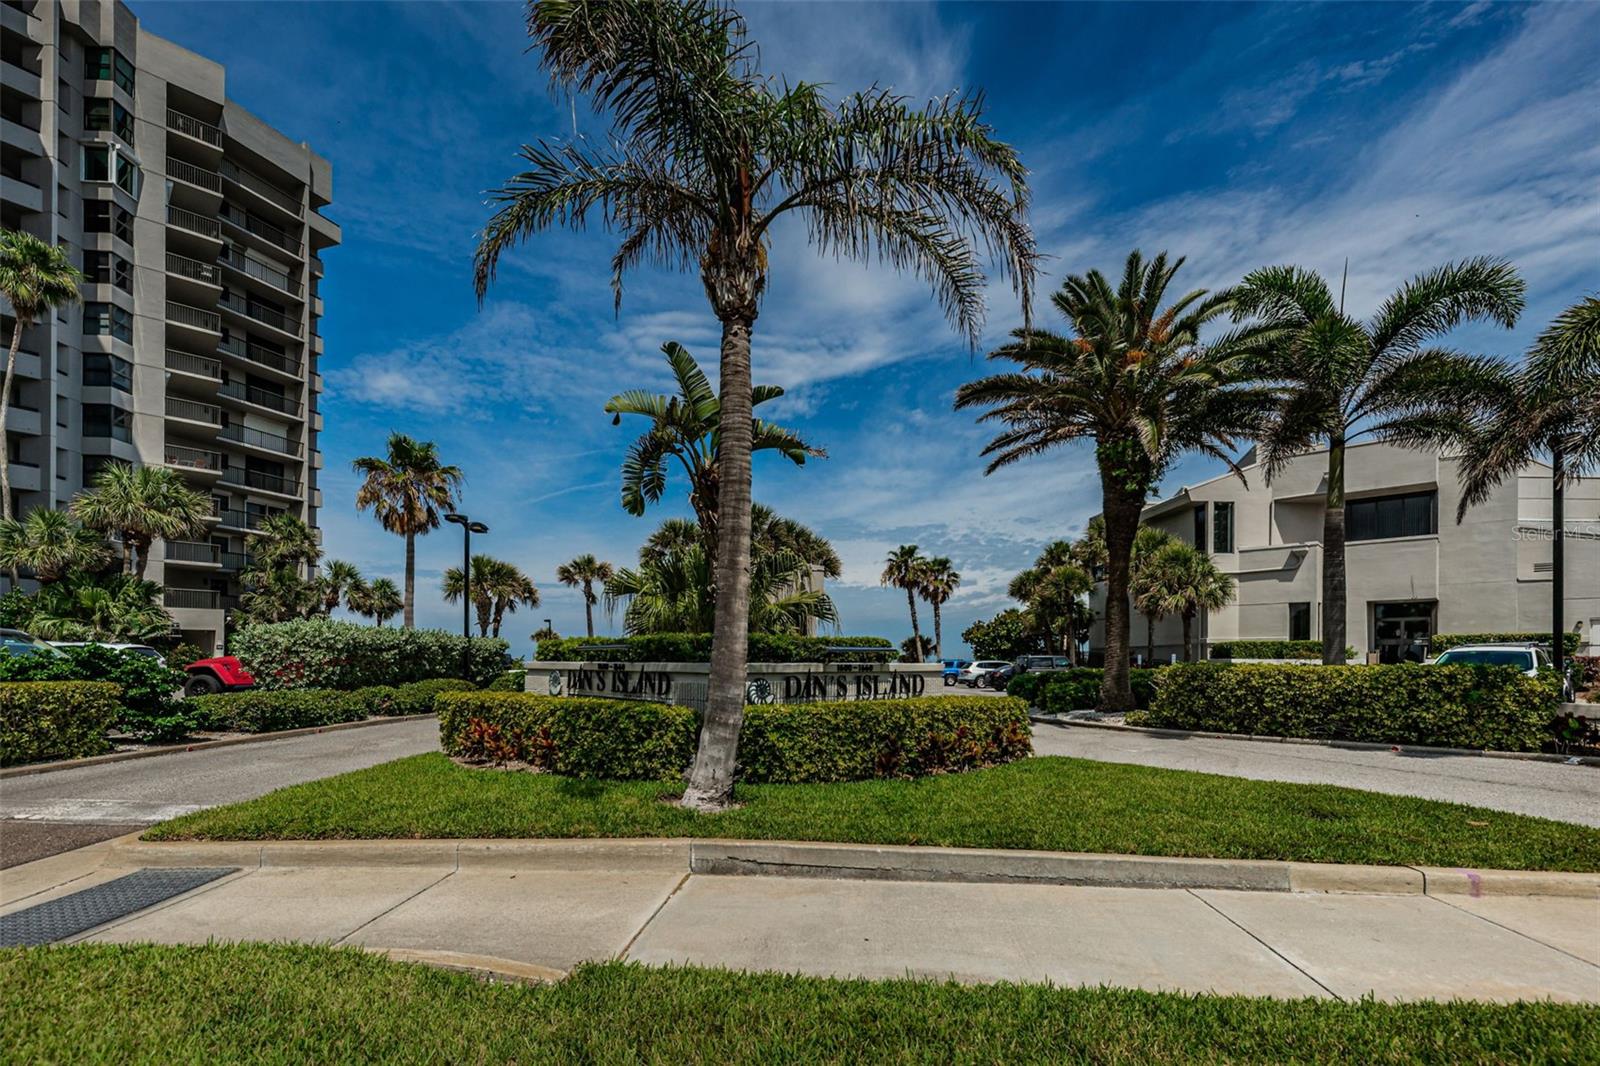 Dan's Island Condos on Sand Key - Live in the 90210 of Pinellas County!